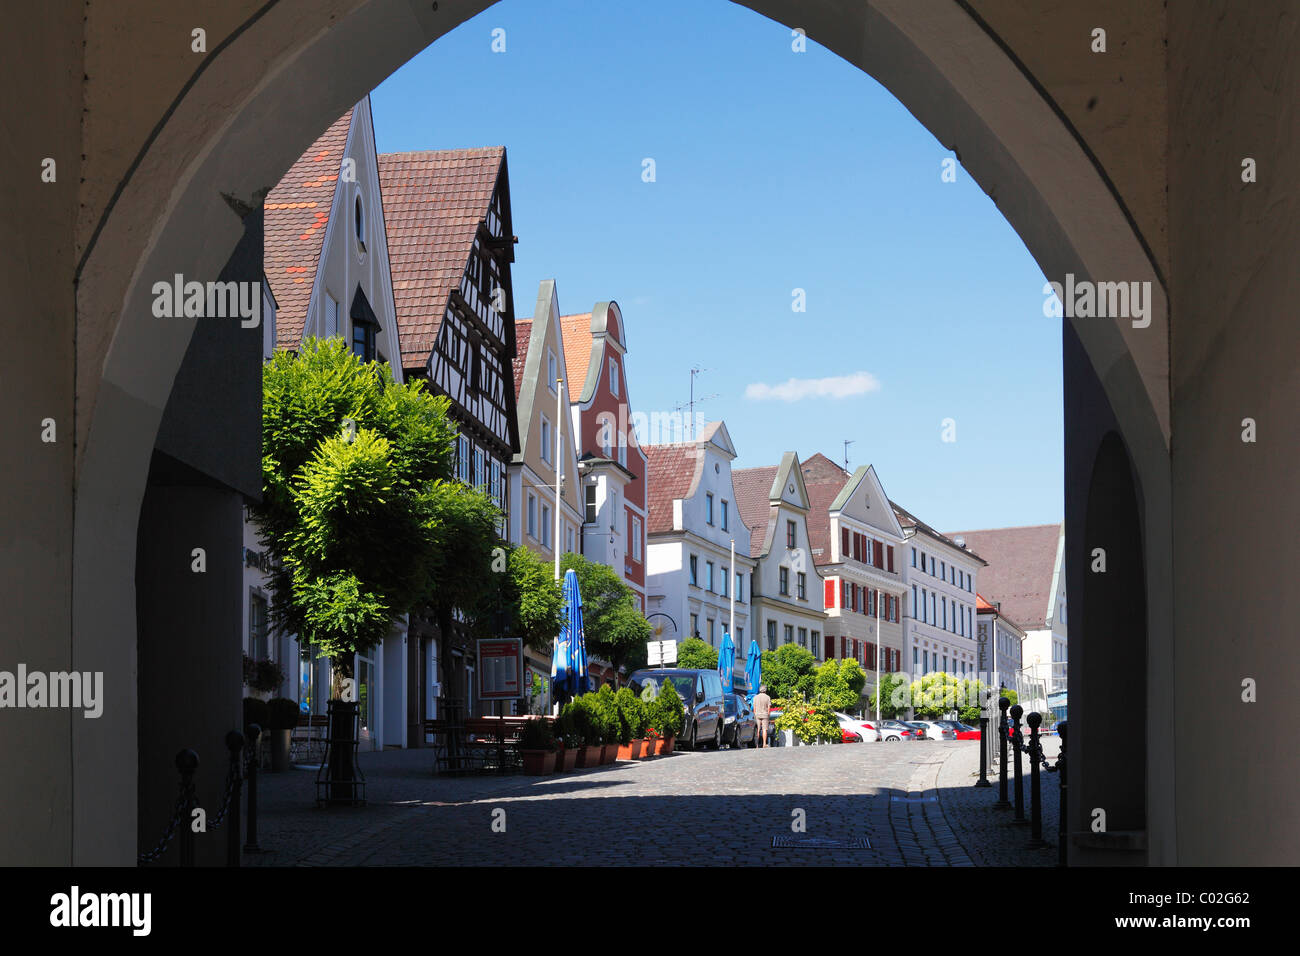 View through the Unteres Tor gate on the marketplace, Guenzburg, Donauried region, Swabia, Bavaria, Germany, Europe Stock Photo